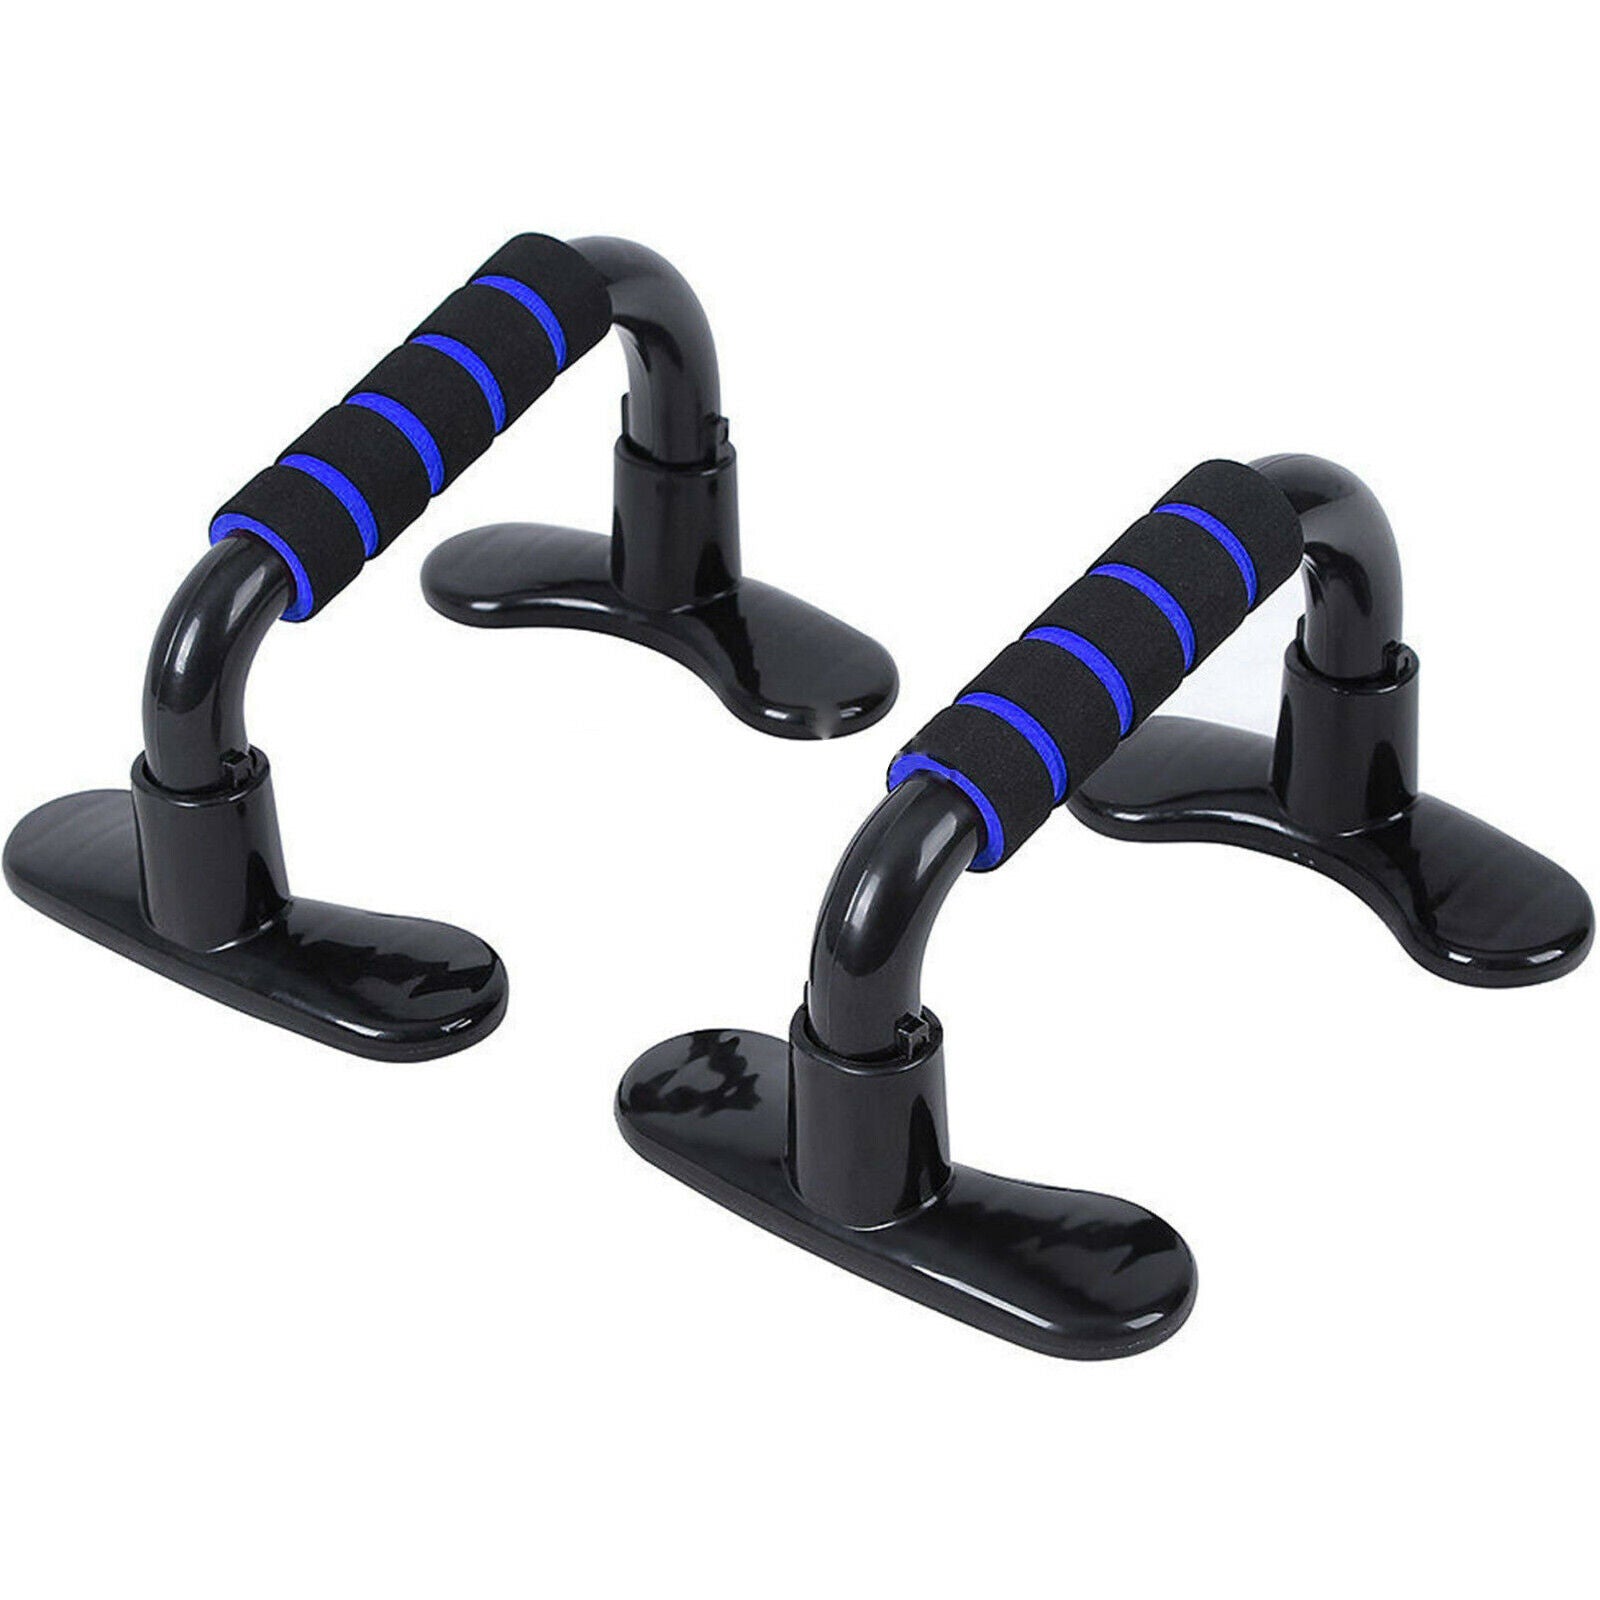 2 PCS PUSH up BARS STAND FOAM HANDLES for GYM FITNESS EXERCISE CHEST PRESS PULL